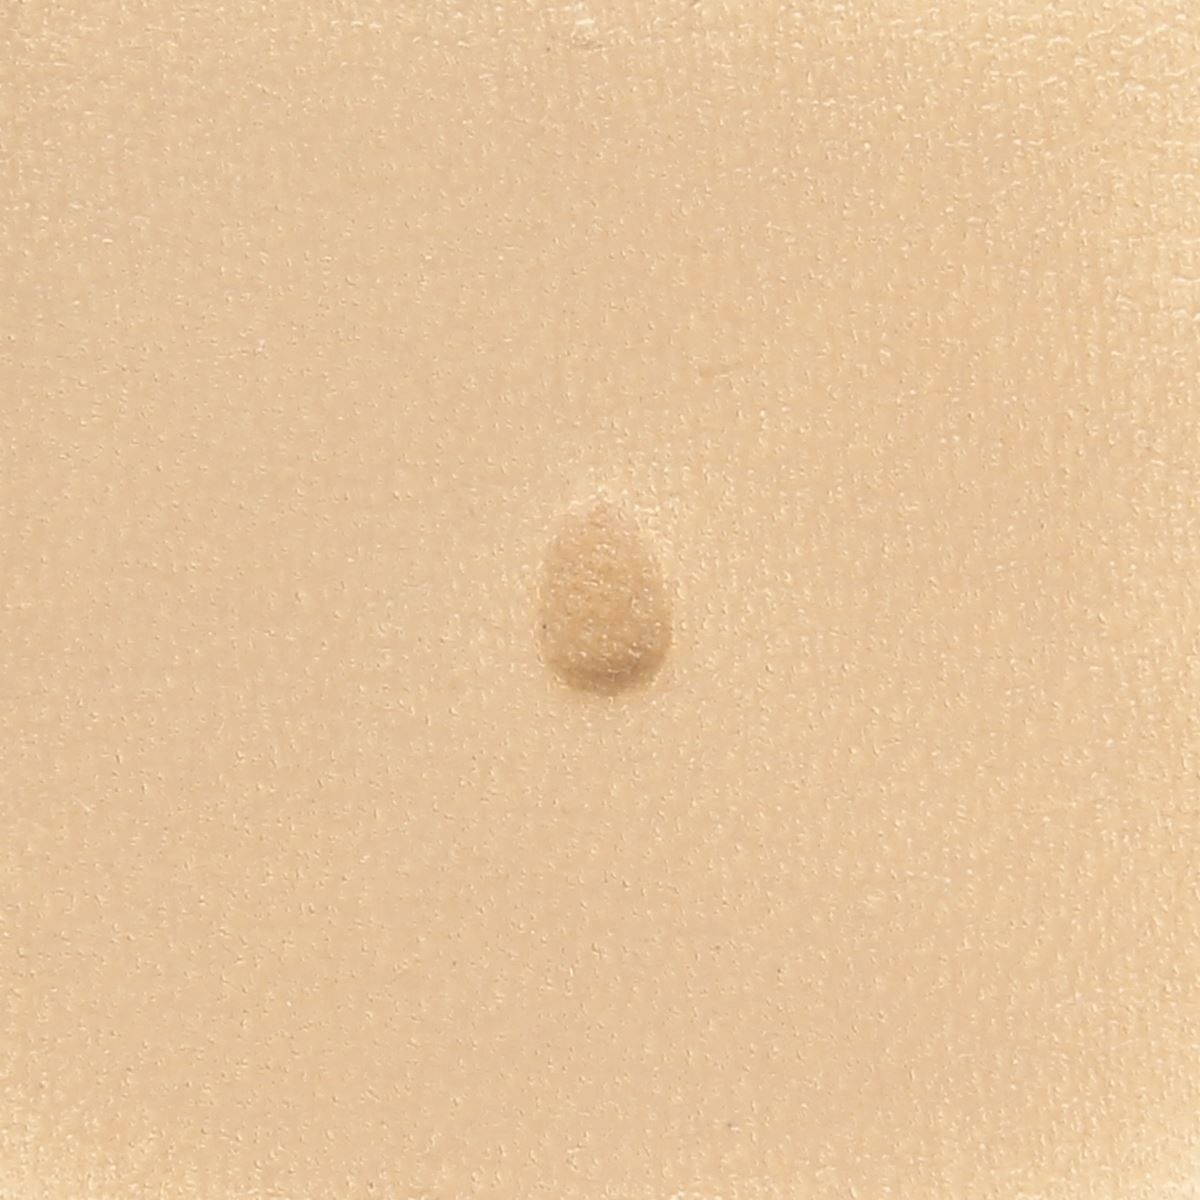 Matoir sur manche TANDY LEATHER - Pear Shader lisse 4 mm - 6972 - P972